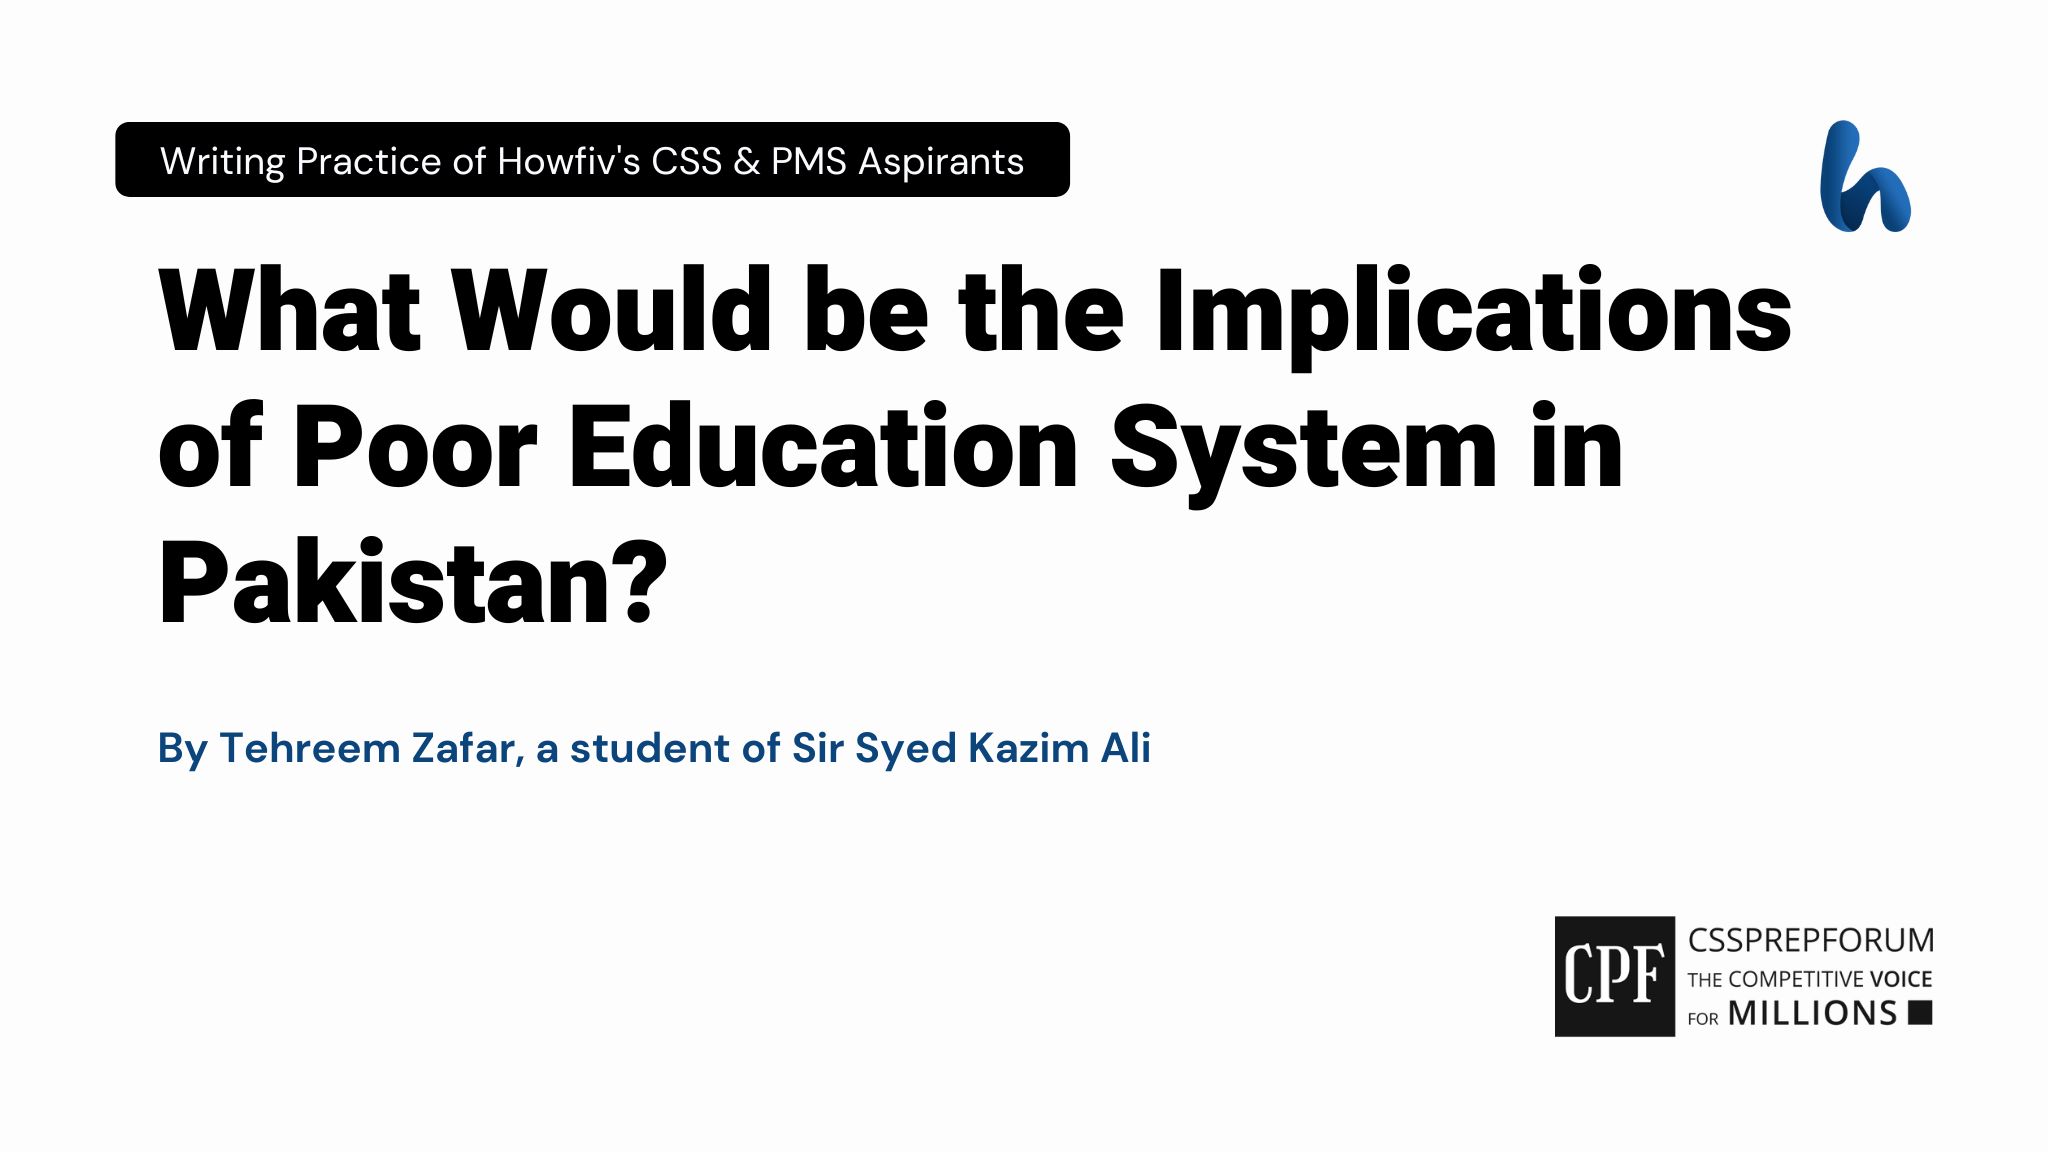 What Would be the Implications of Poor Education System in Pakistan? by Tehreem Zafar